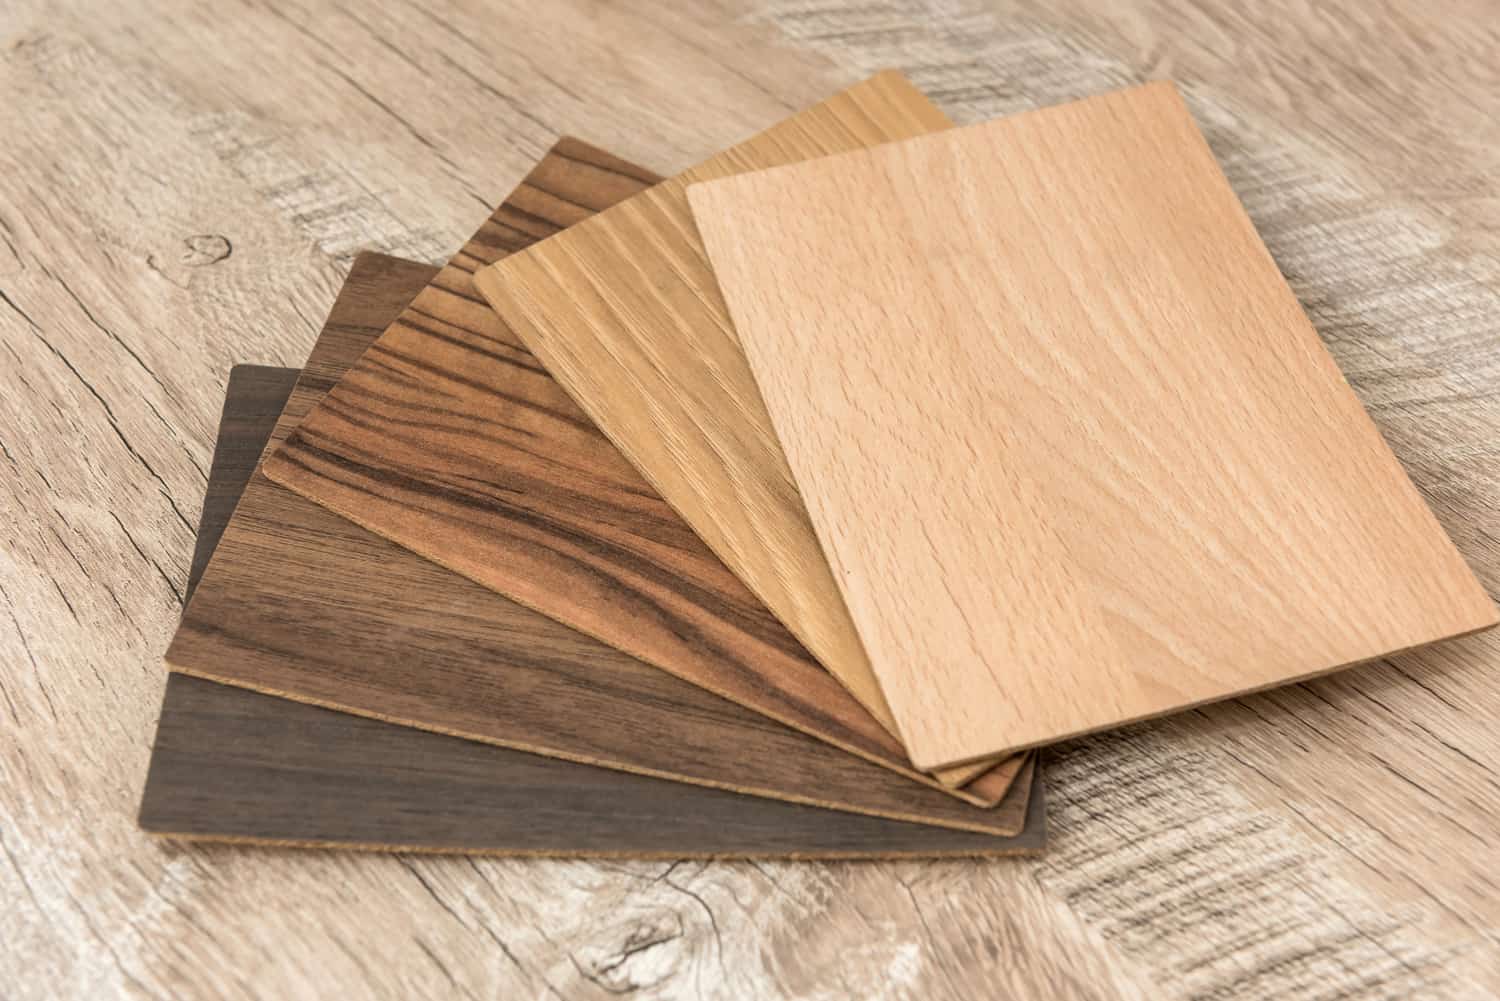 How Thick Is Wood Flooring Including, What Is The Best Thickness For Hardwood Floors